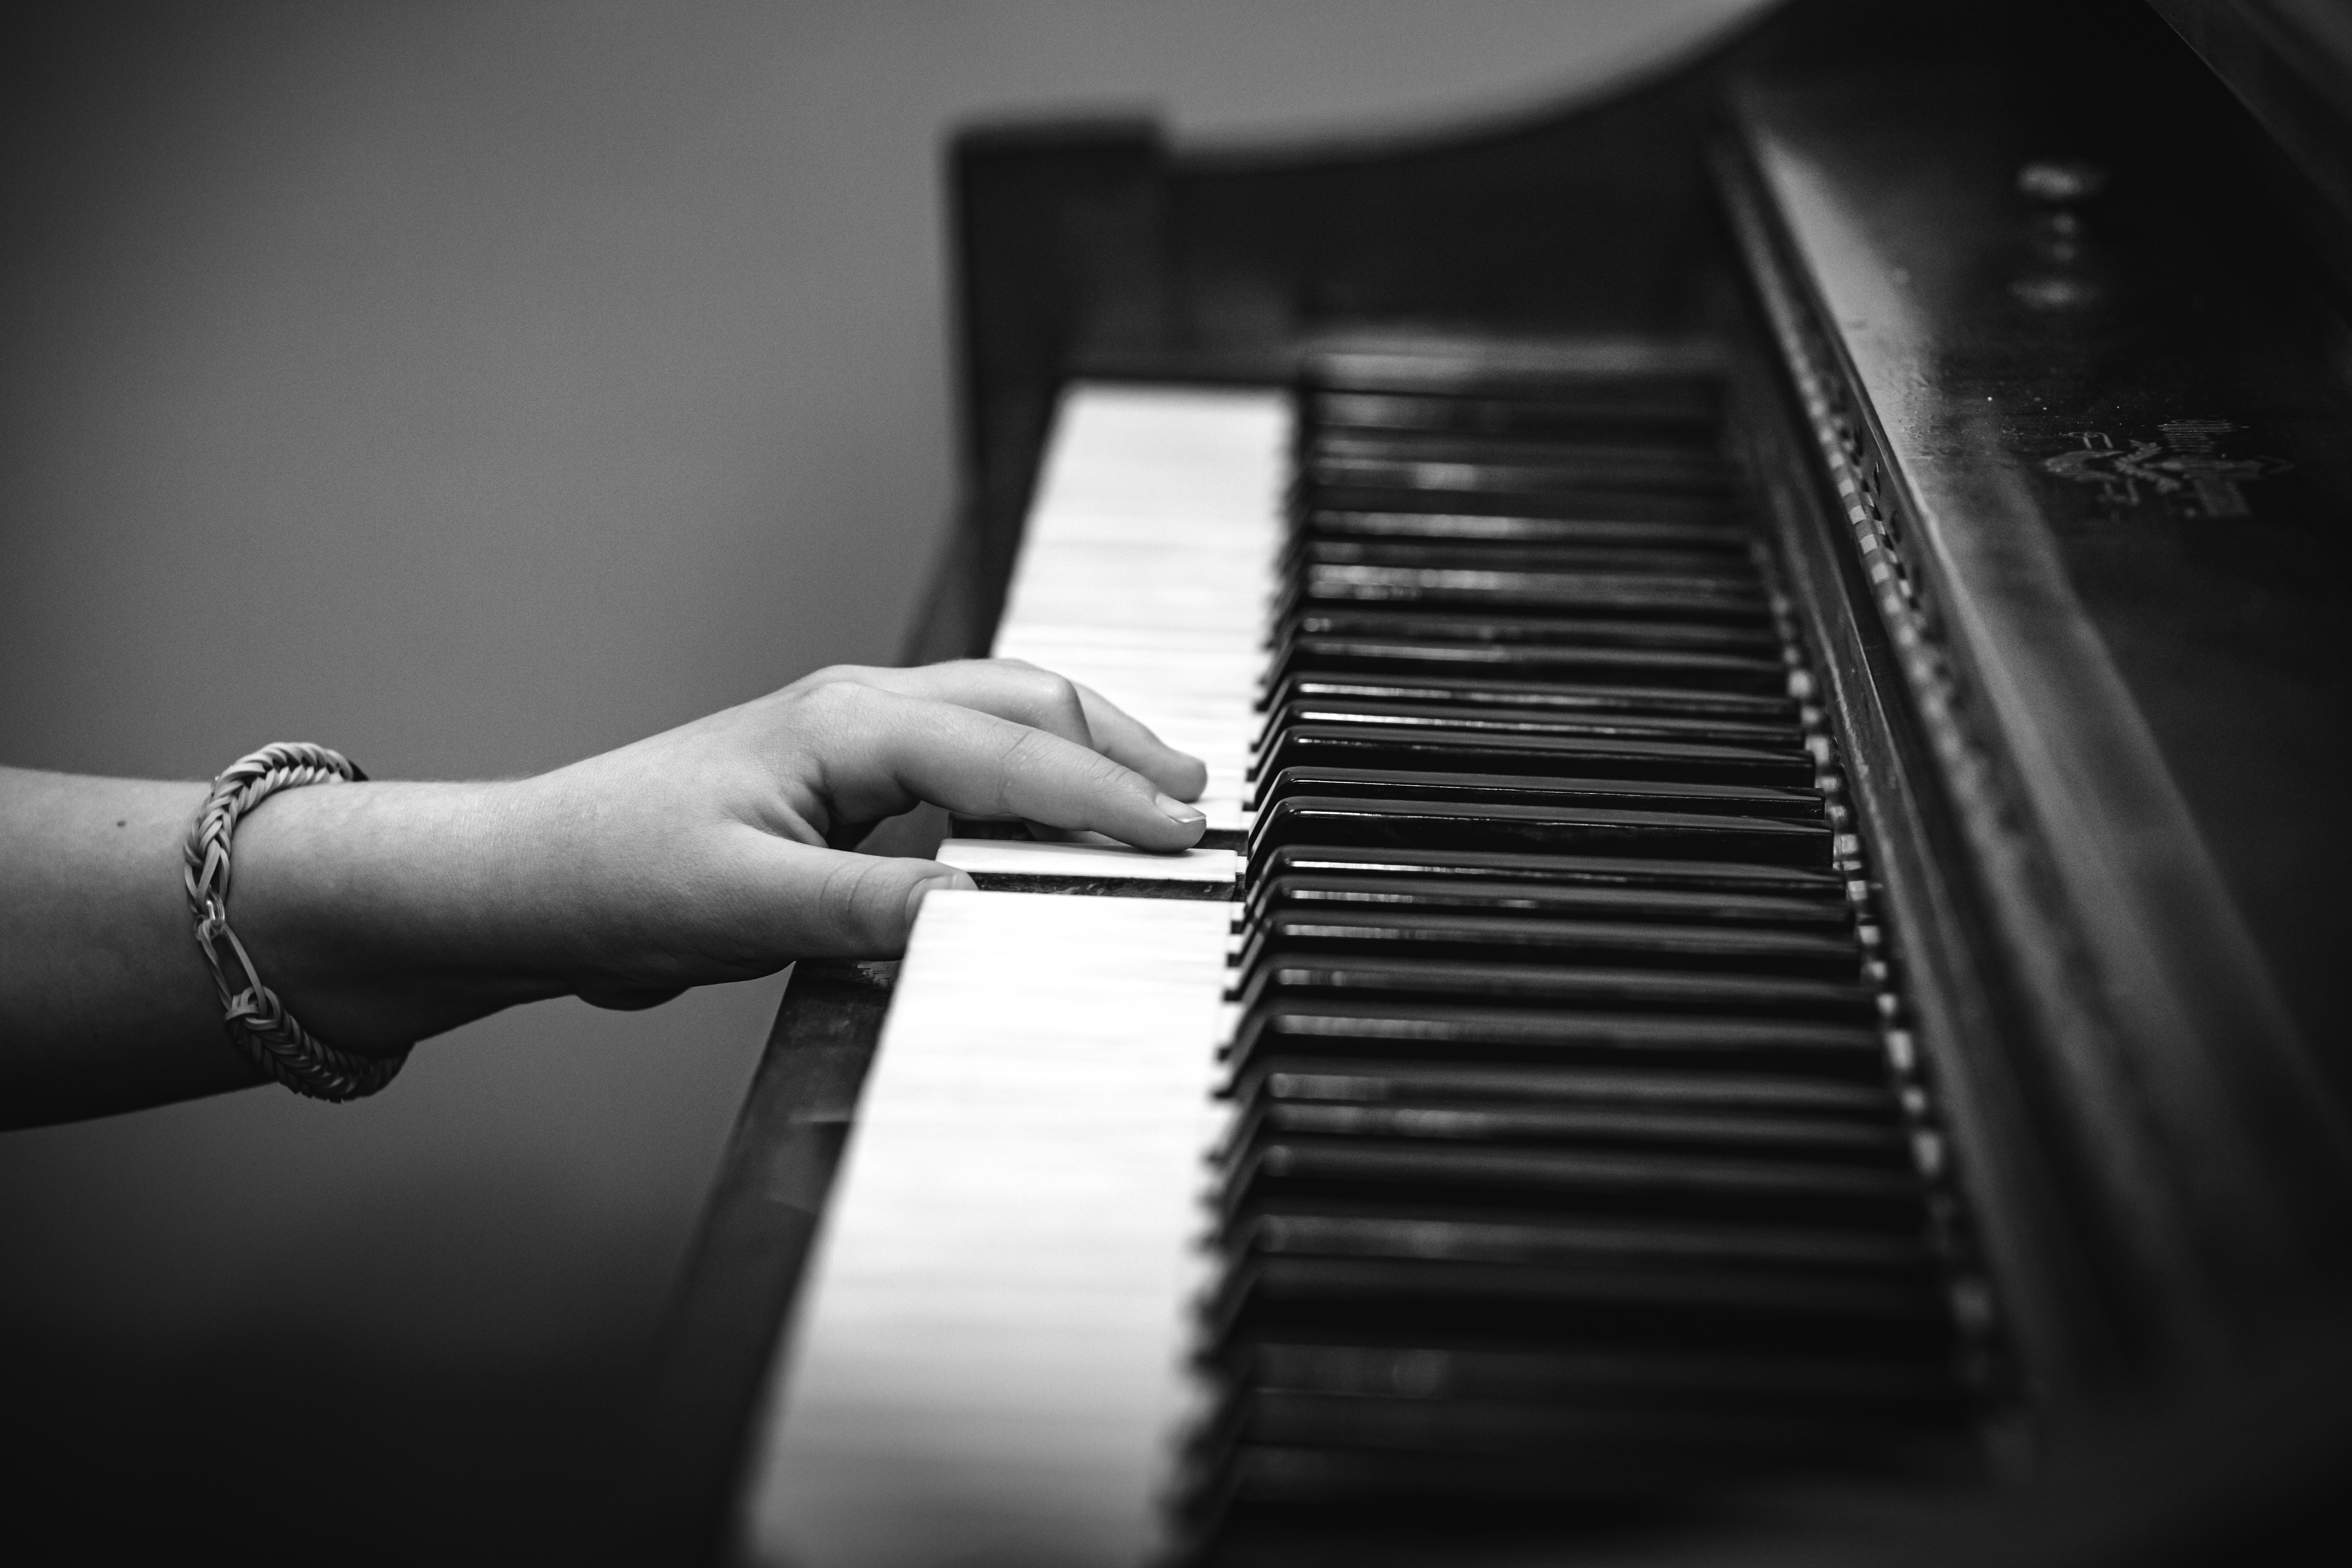 music lessons guitar lessons piano lesson voice lessons violin lesssons singing lessons drum lessons in st joseph mo near me toddler music art classes 52